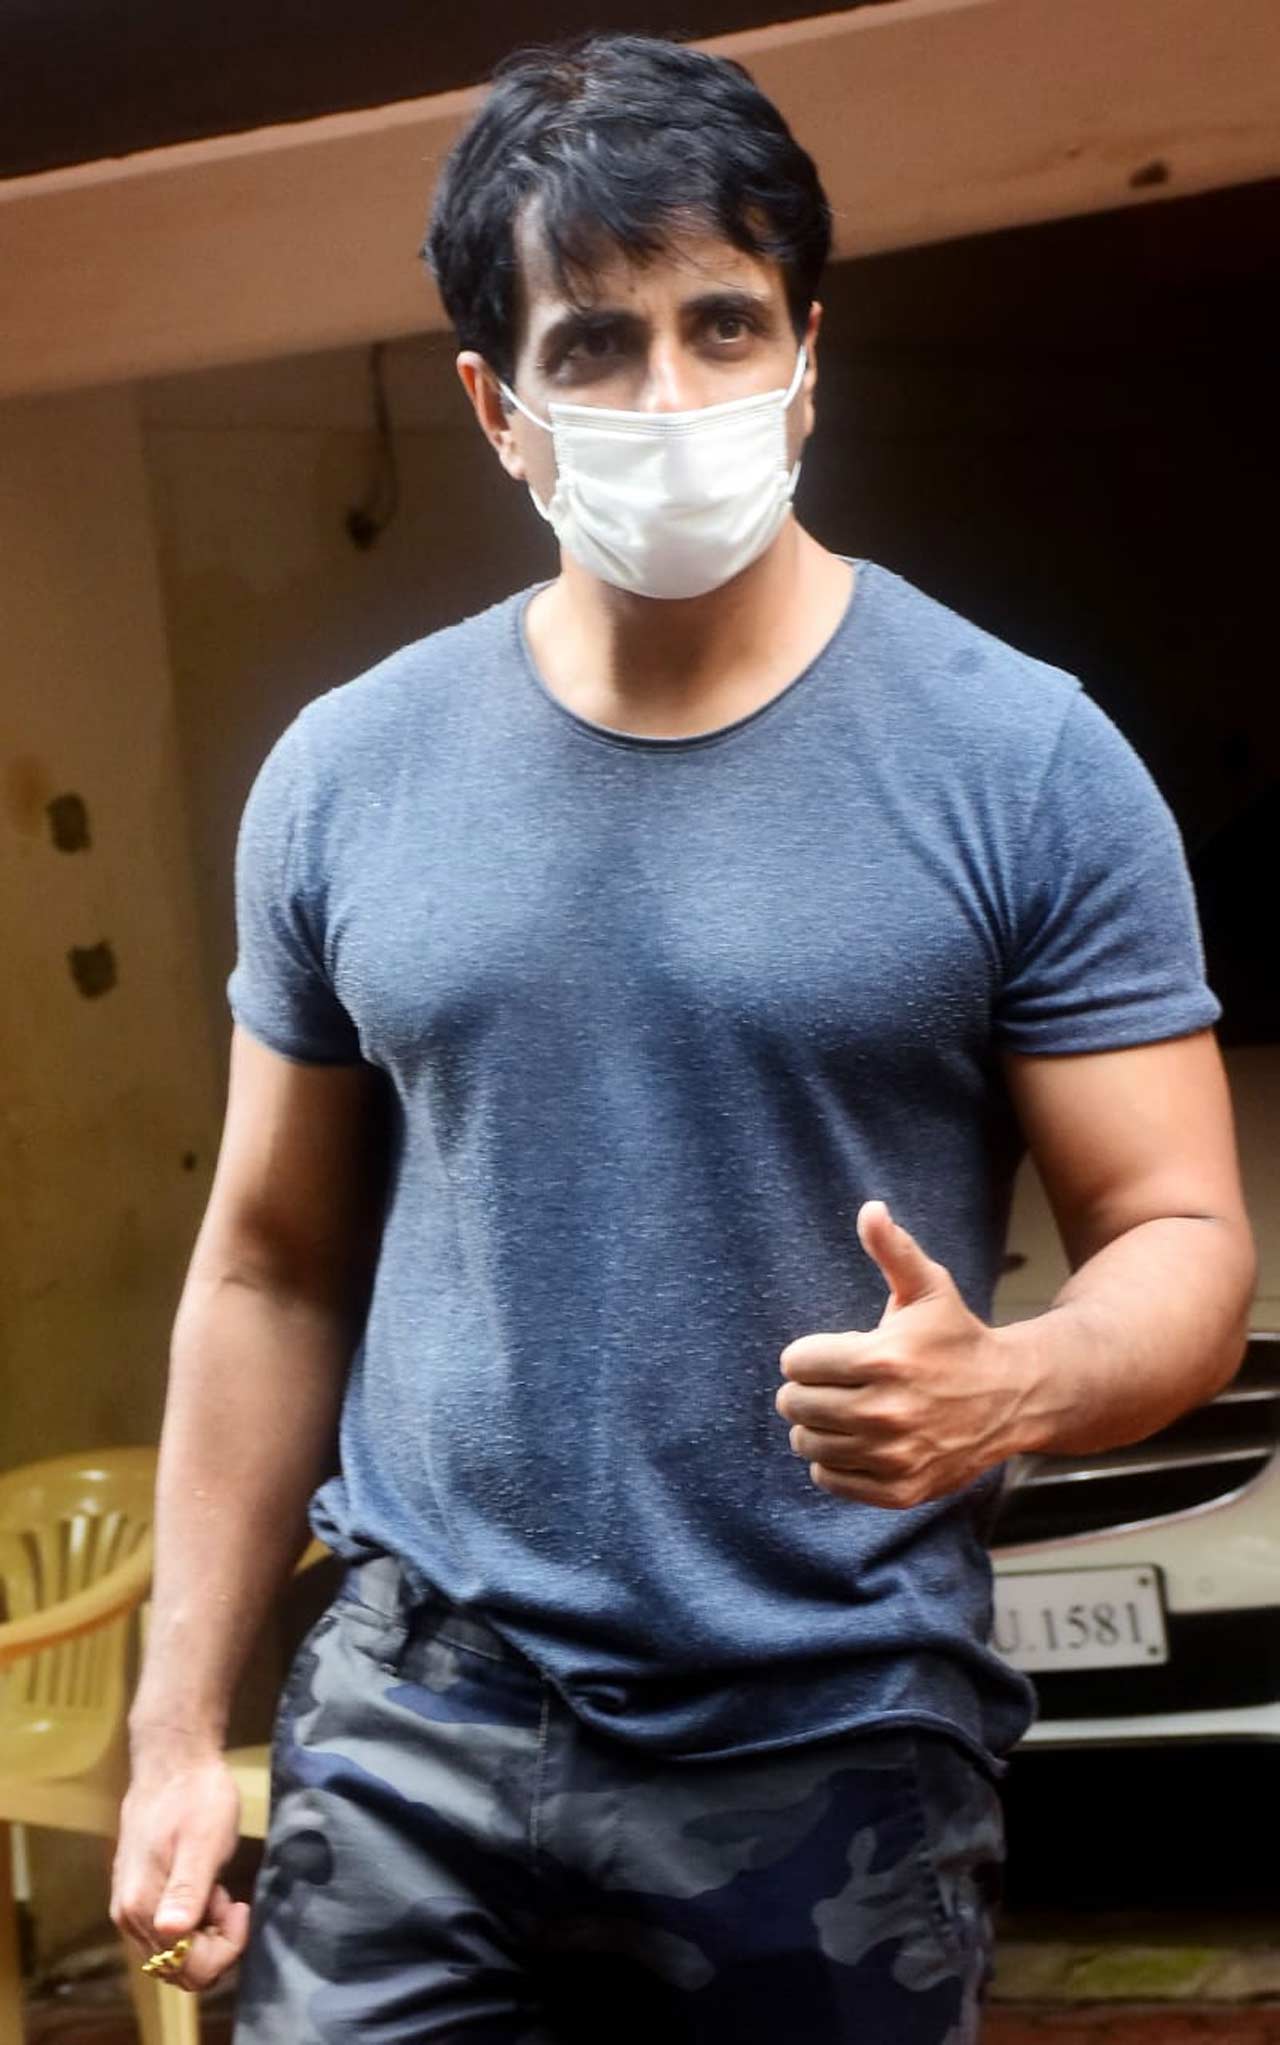 Sonu Sood posed for the paparazzi when snapped at his Andheri residence. Ever since the Coronavirus pandemic has begun, the one actor who has gone out of his way to help the people in dire need is Sonu Sood. In these last one-and-a-half years, Sood has been hailed as the Messiah of the people even though he humbly refuses to accept the honour bestowed upon him. 